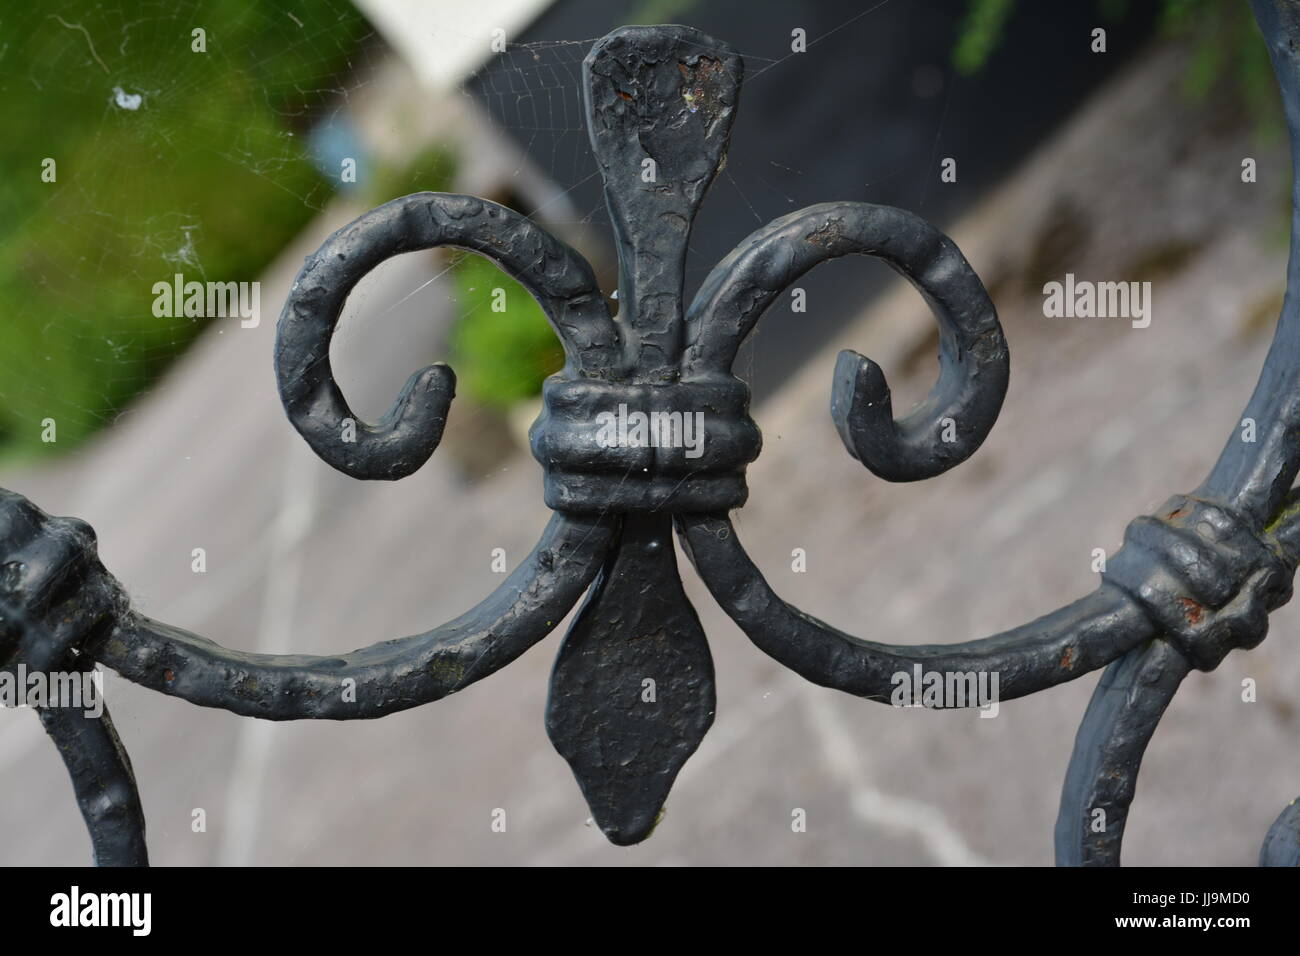 Fleur de lis lys close up detail of weathered black painted decorative metal gate re architecture design wrought iron work heritage Stock Photo